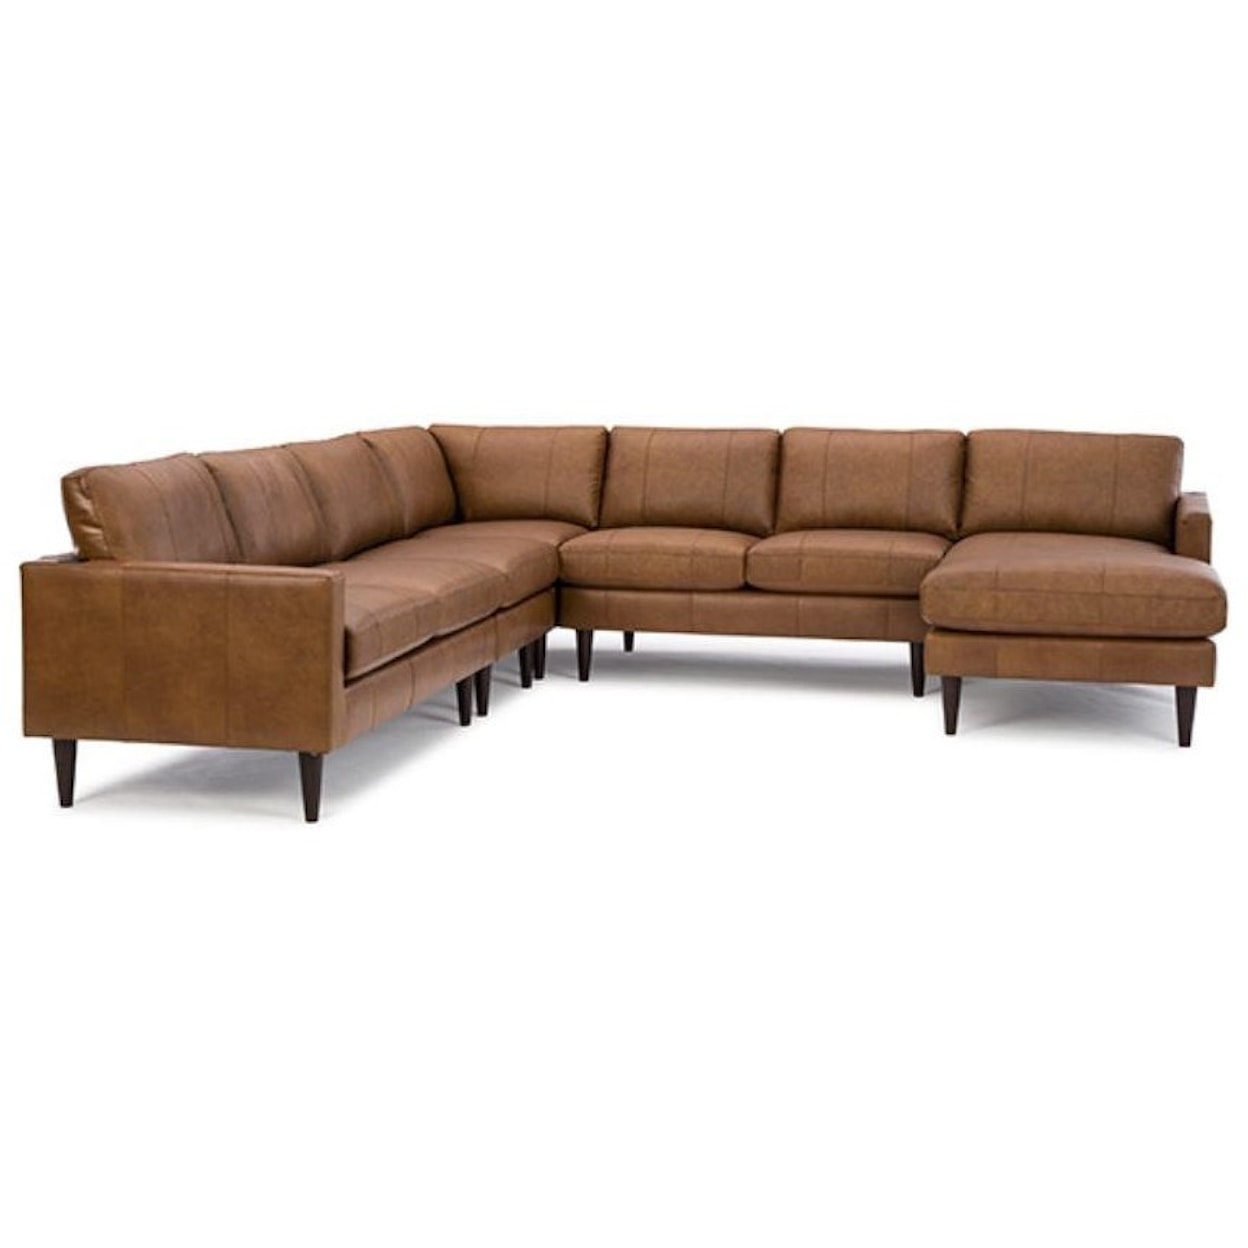 Best Home Furnishings Chelsea Leather Sectional with Chaise